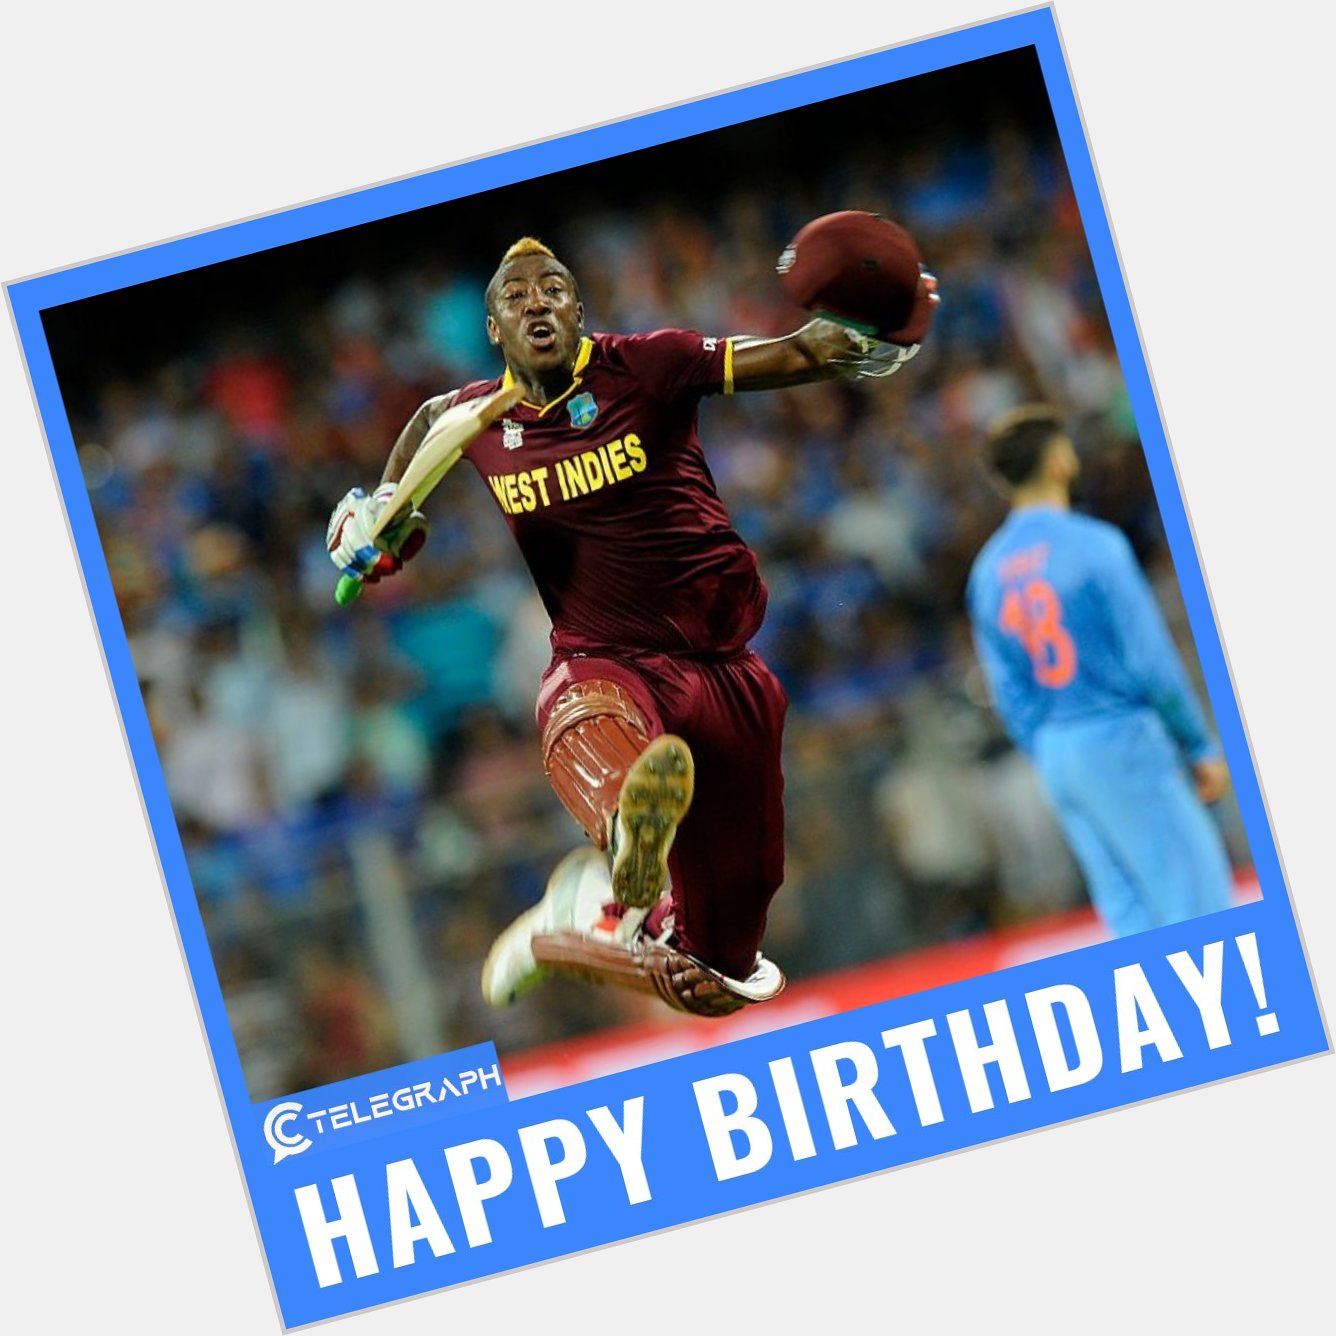 Happy Birthday to one of the most destructive players in the game, Andre Russell!  